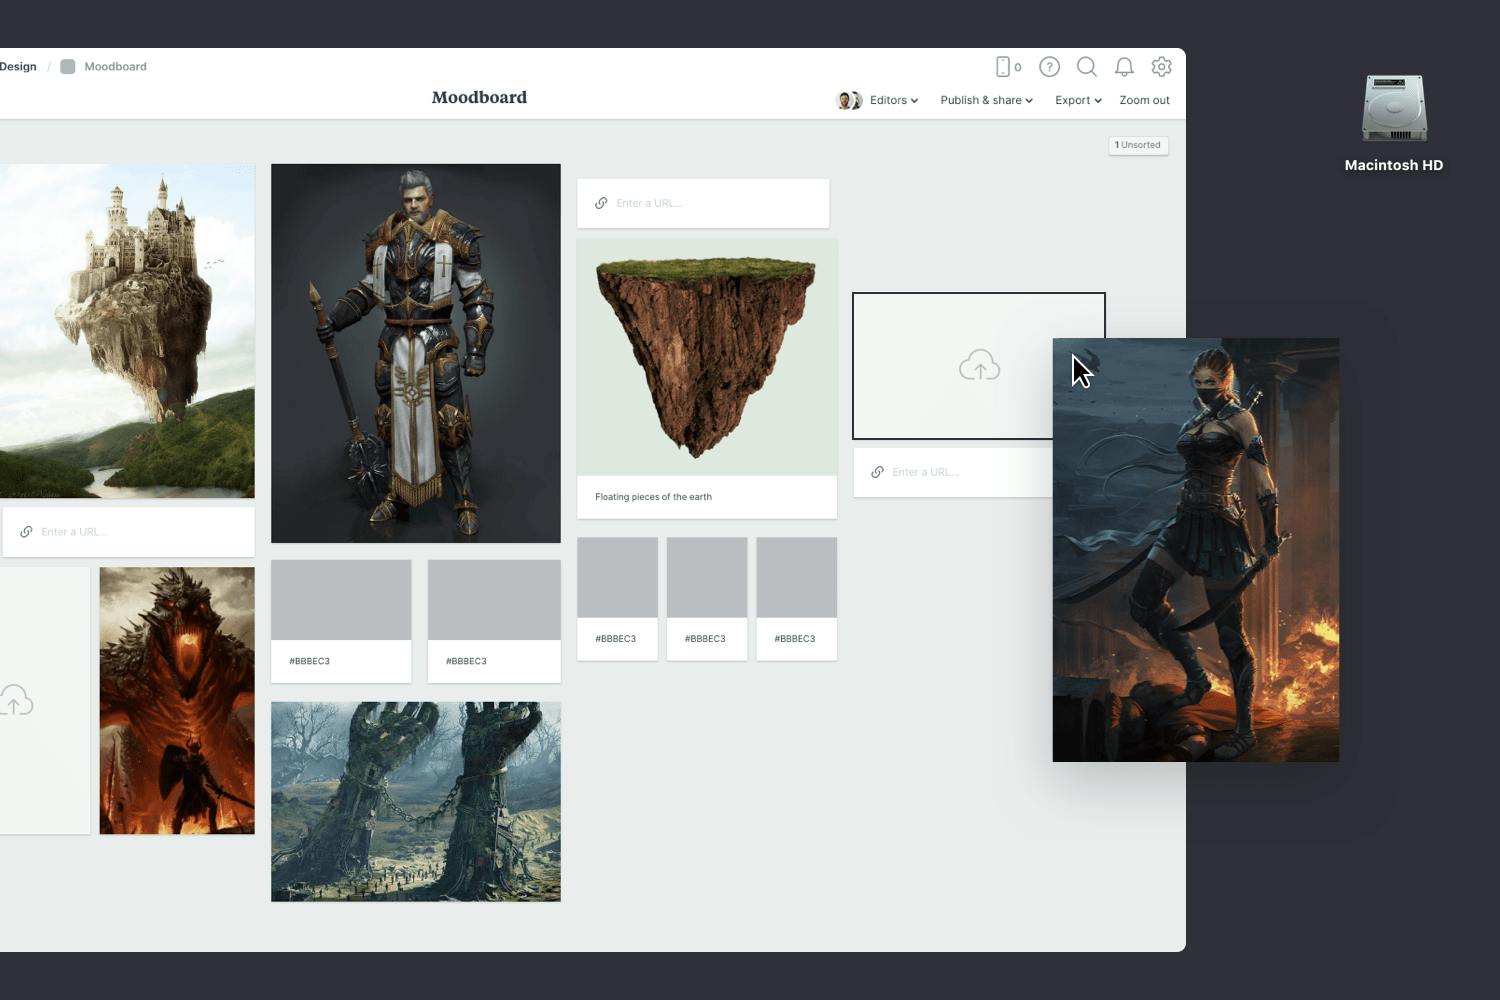 Adding images to a game design moodboard template